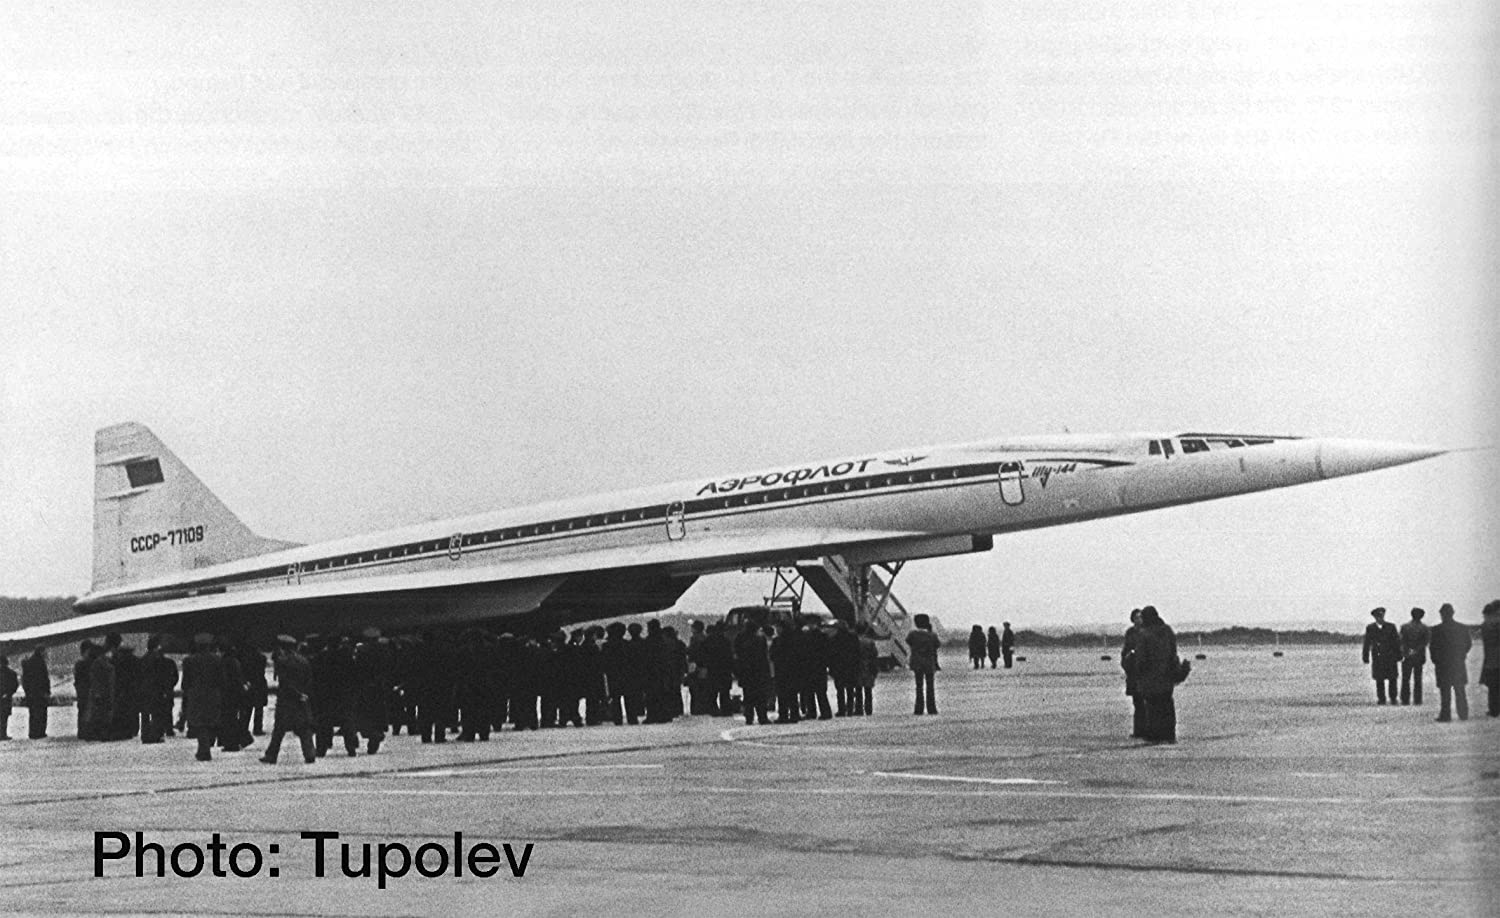 Herpa 533324 Tupolev TU-144S Mini for Crafts and Collecting, Multi-Coloured